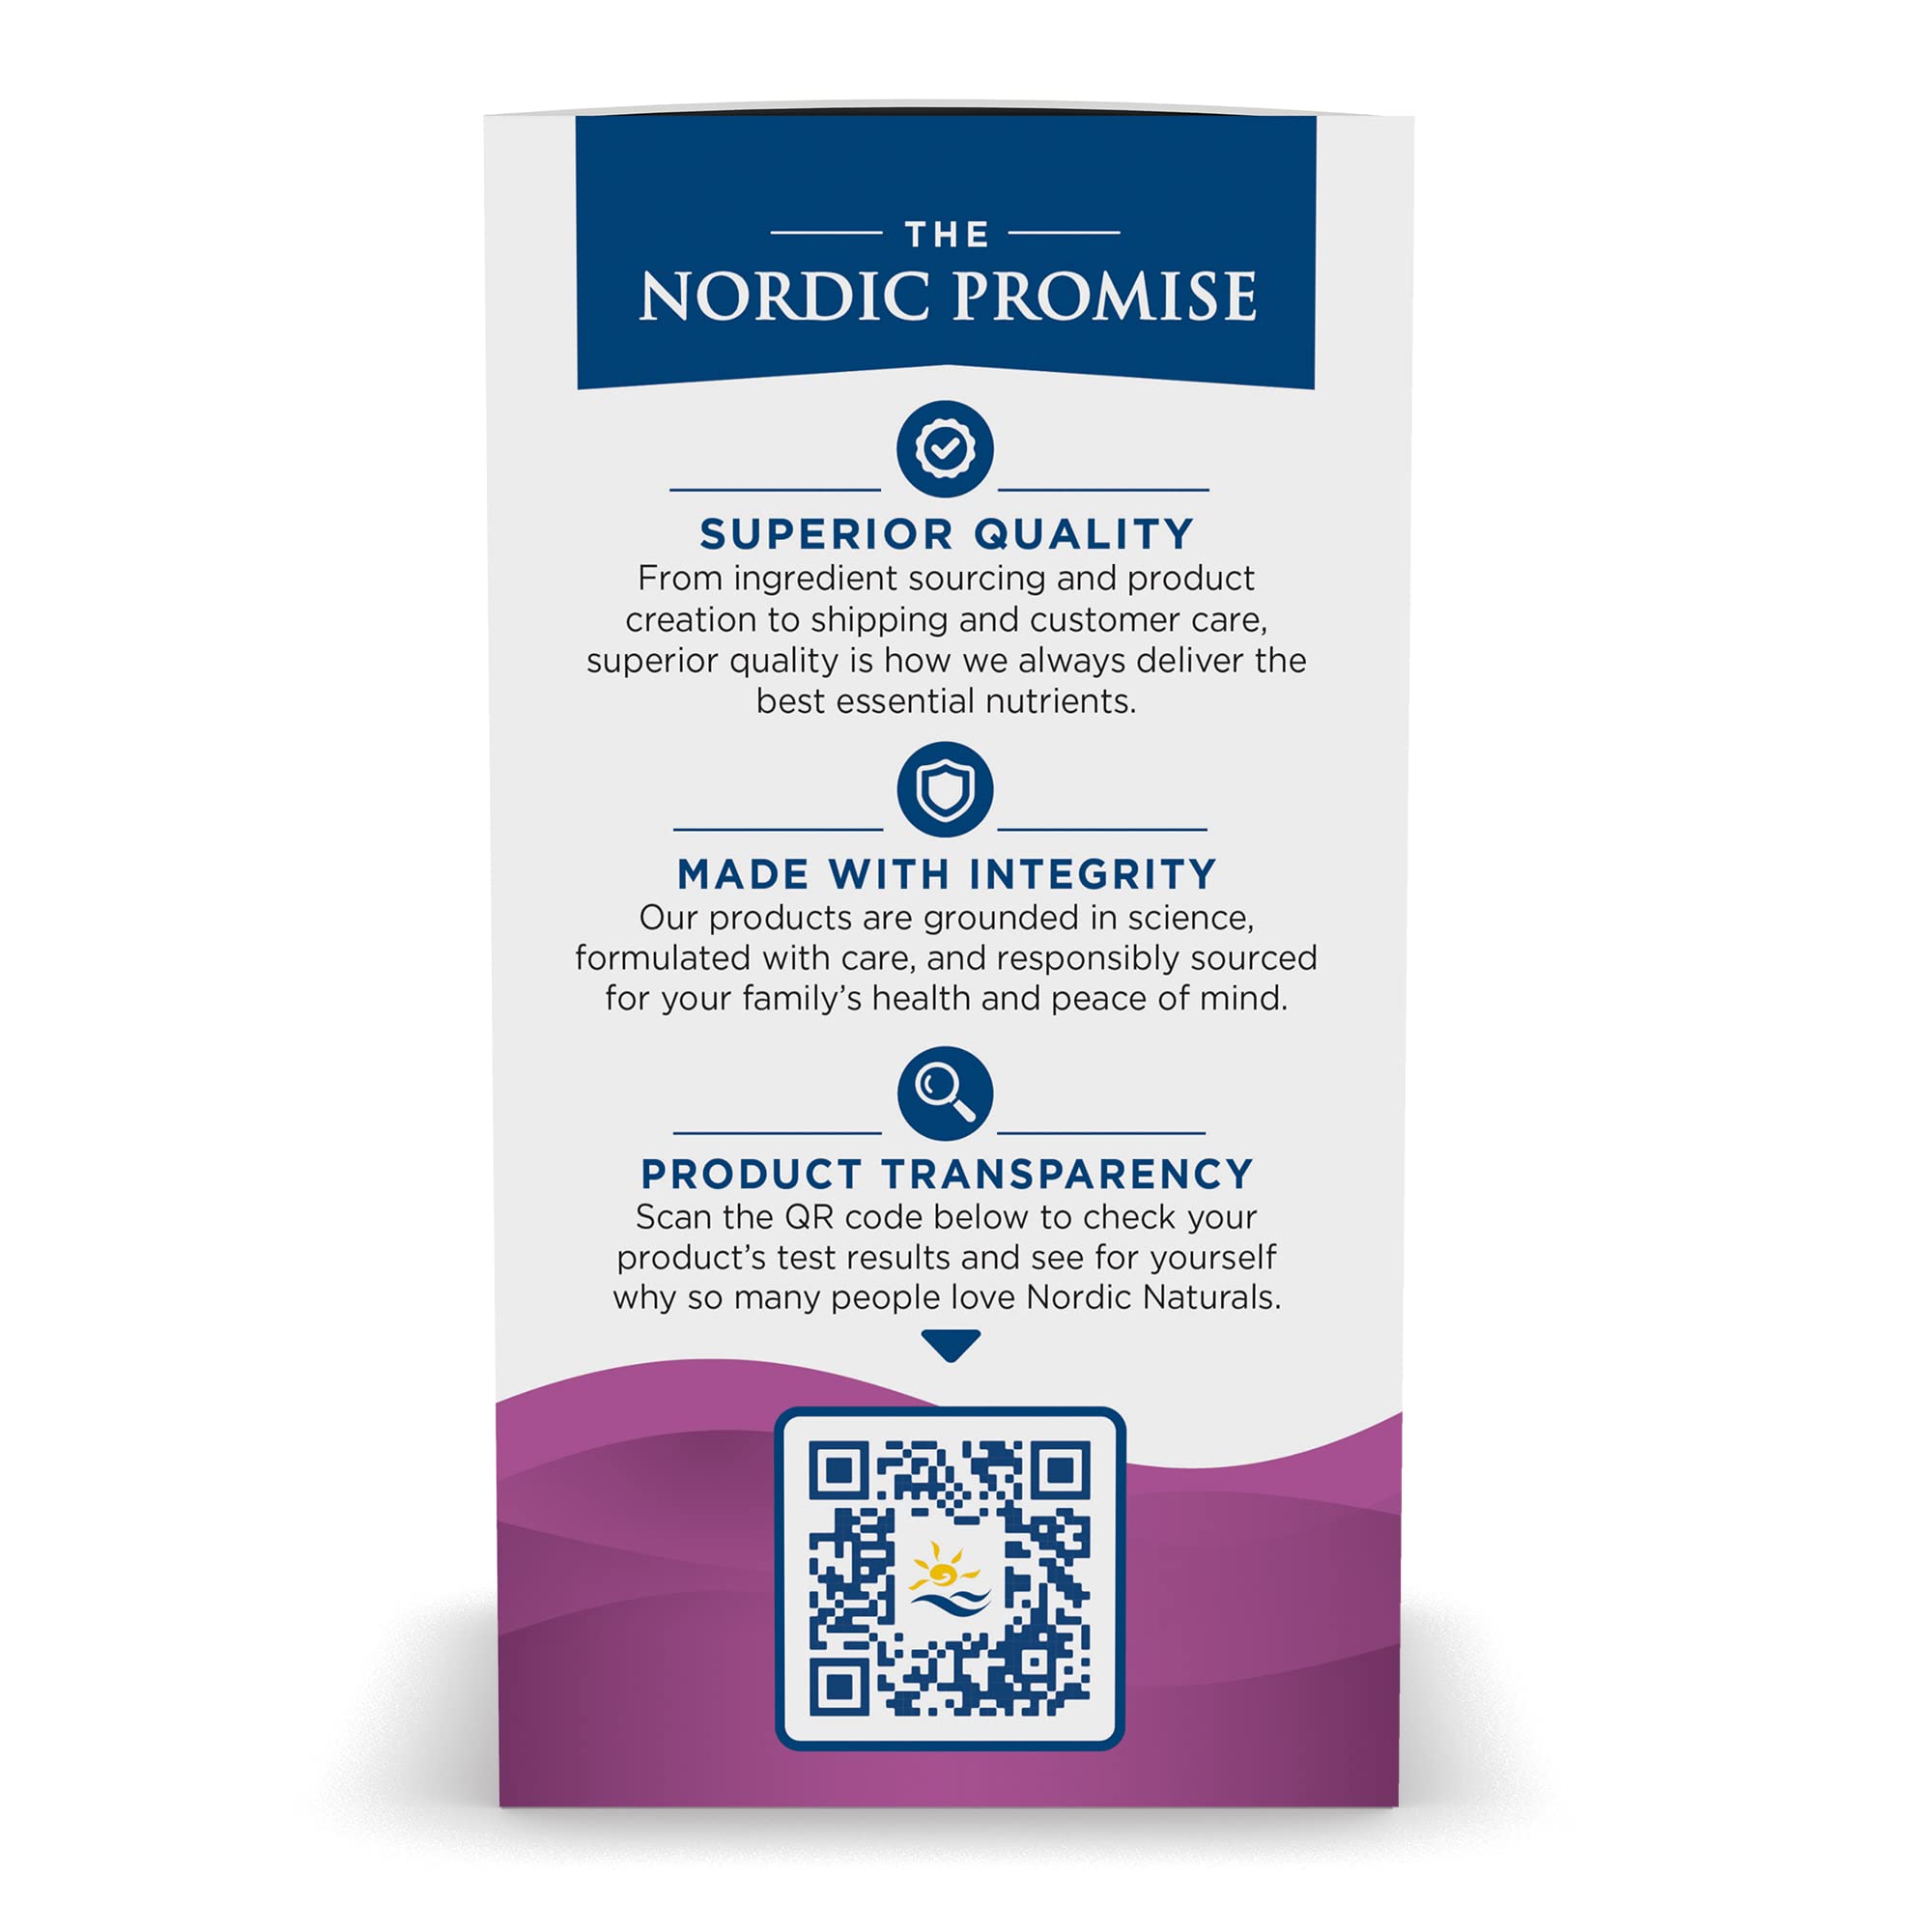 Nordic Naturals Prenatal DHA, Unflavored - 830 mg Omega-3 + 400 IU Vitamin D3 - 90 Soft Gels - Supports Brain Development in Babies During Pregnancy & Lactation - Non-GMO - 45 Servings